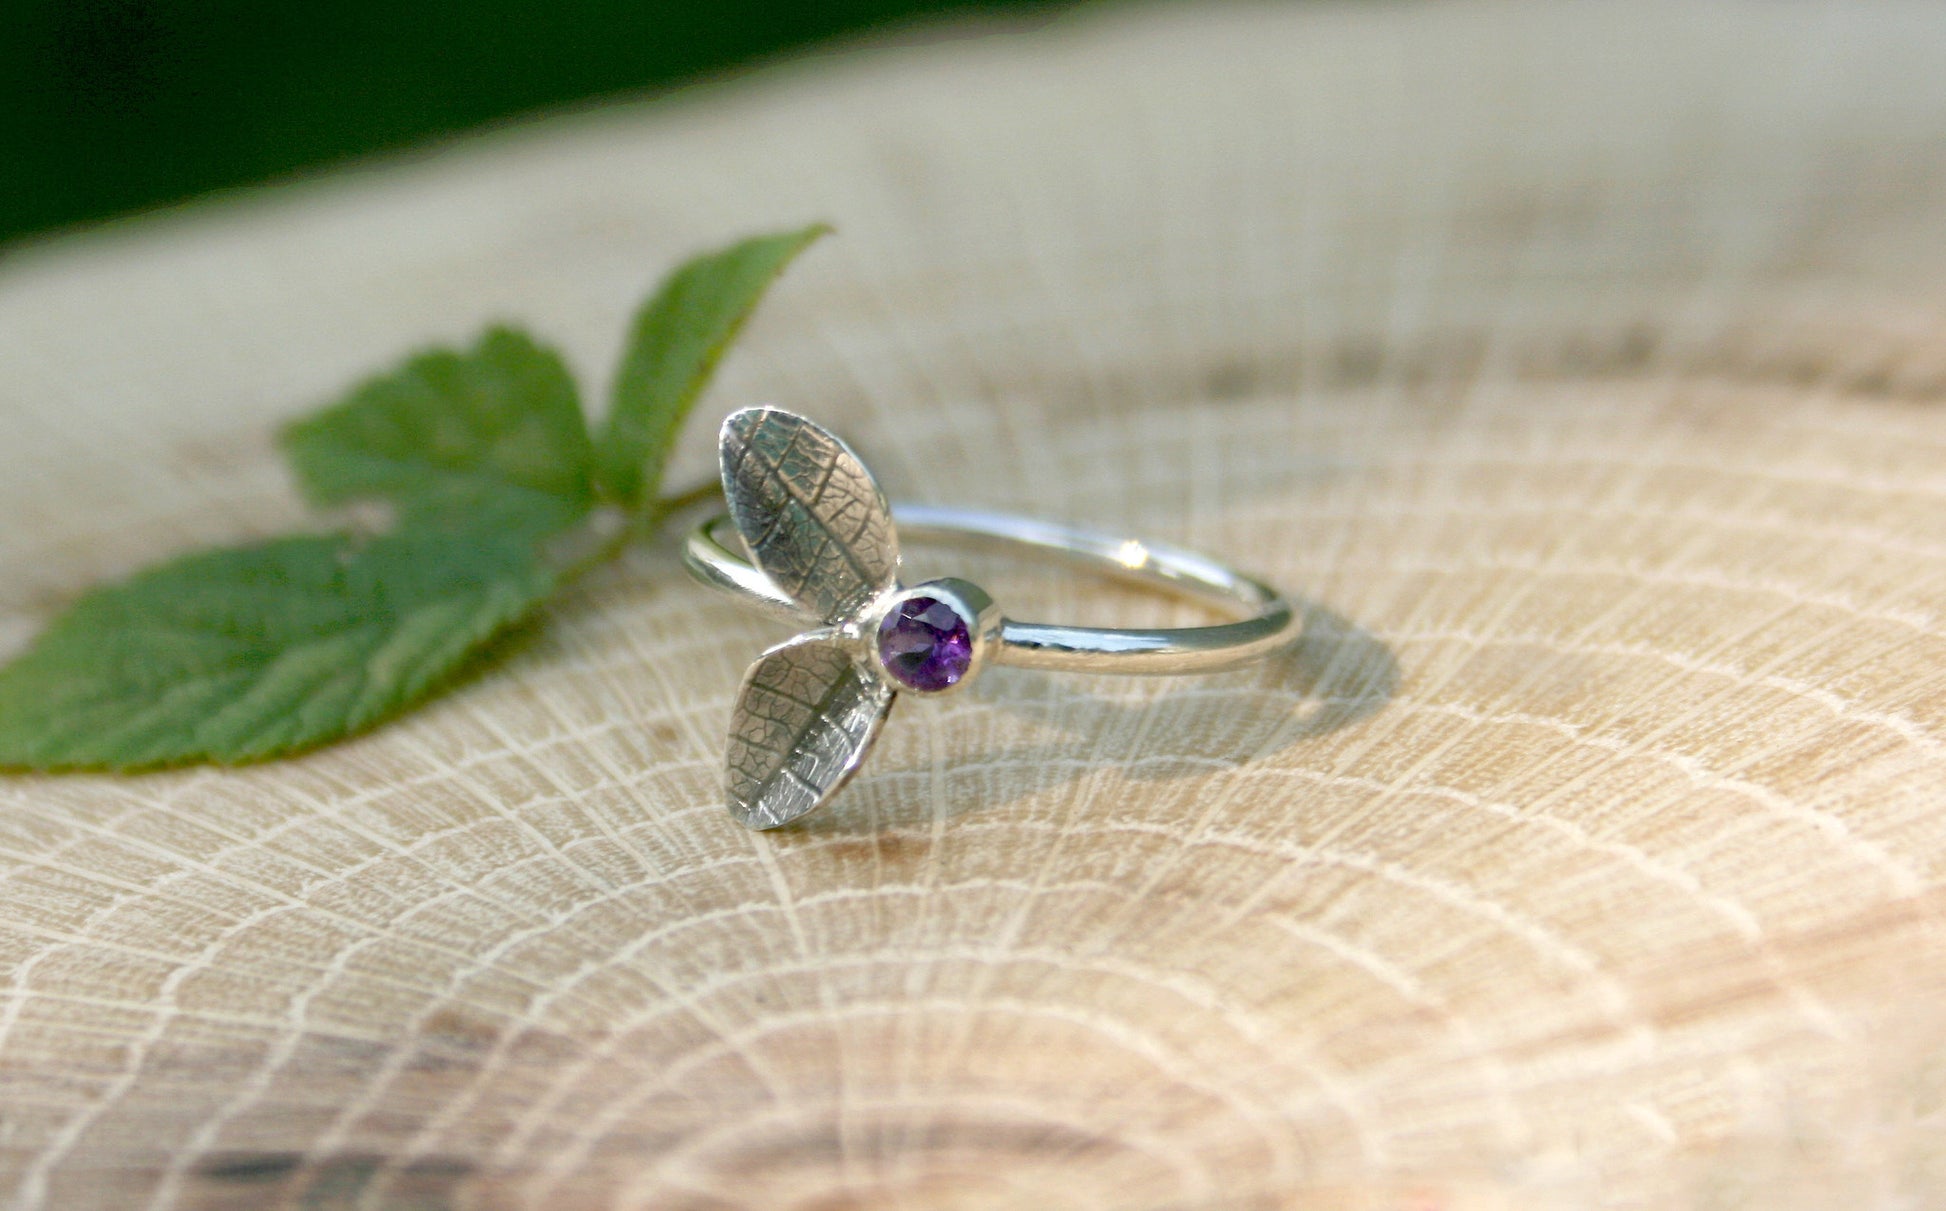 Silver Twin Leaf Ring with Amethyst - Curious Magpie Jewellery - 2